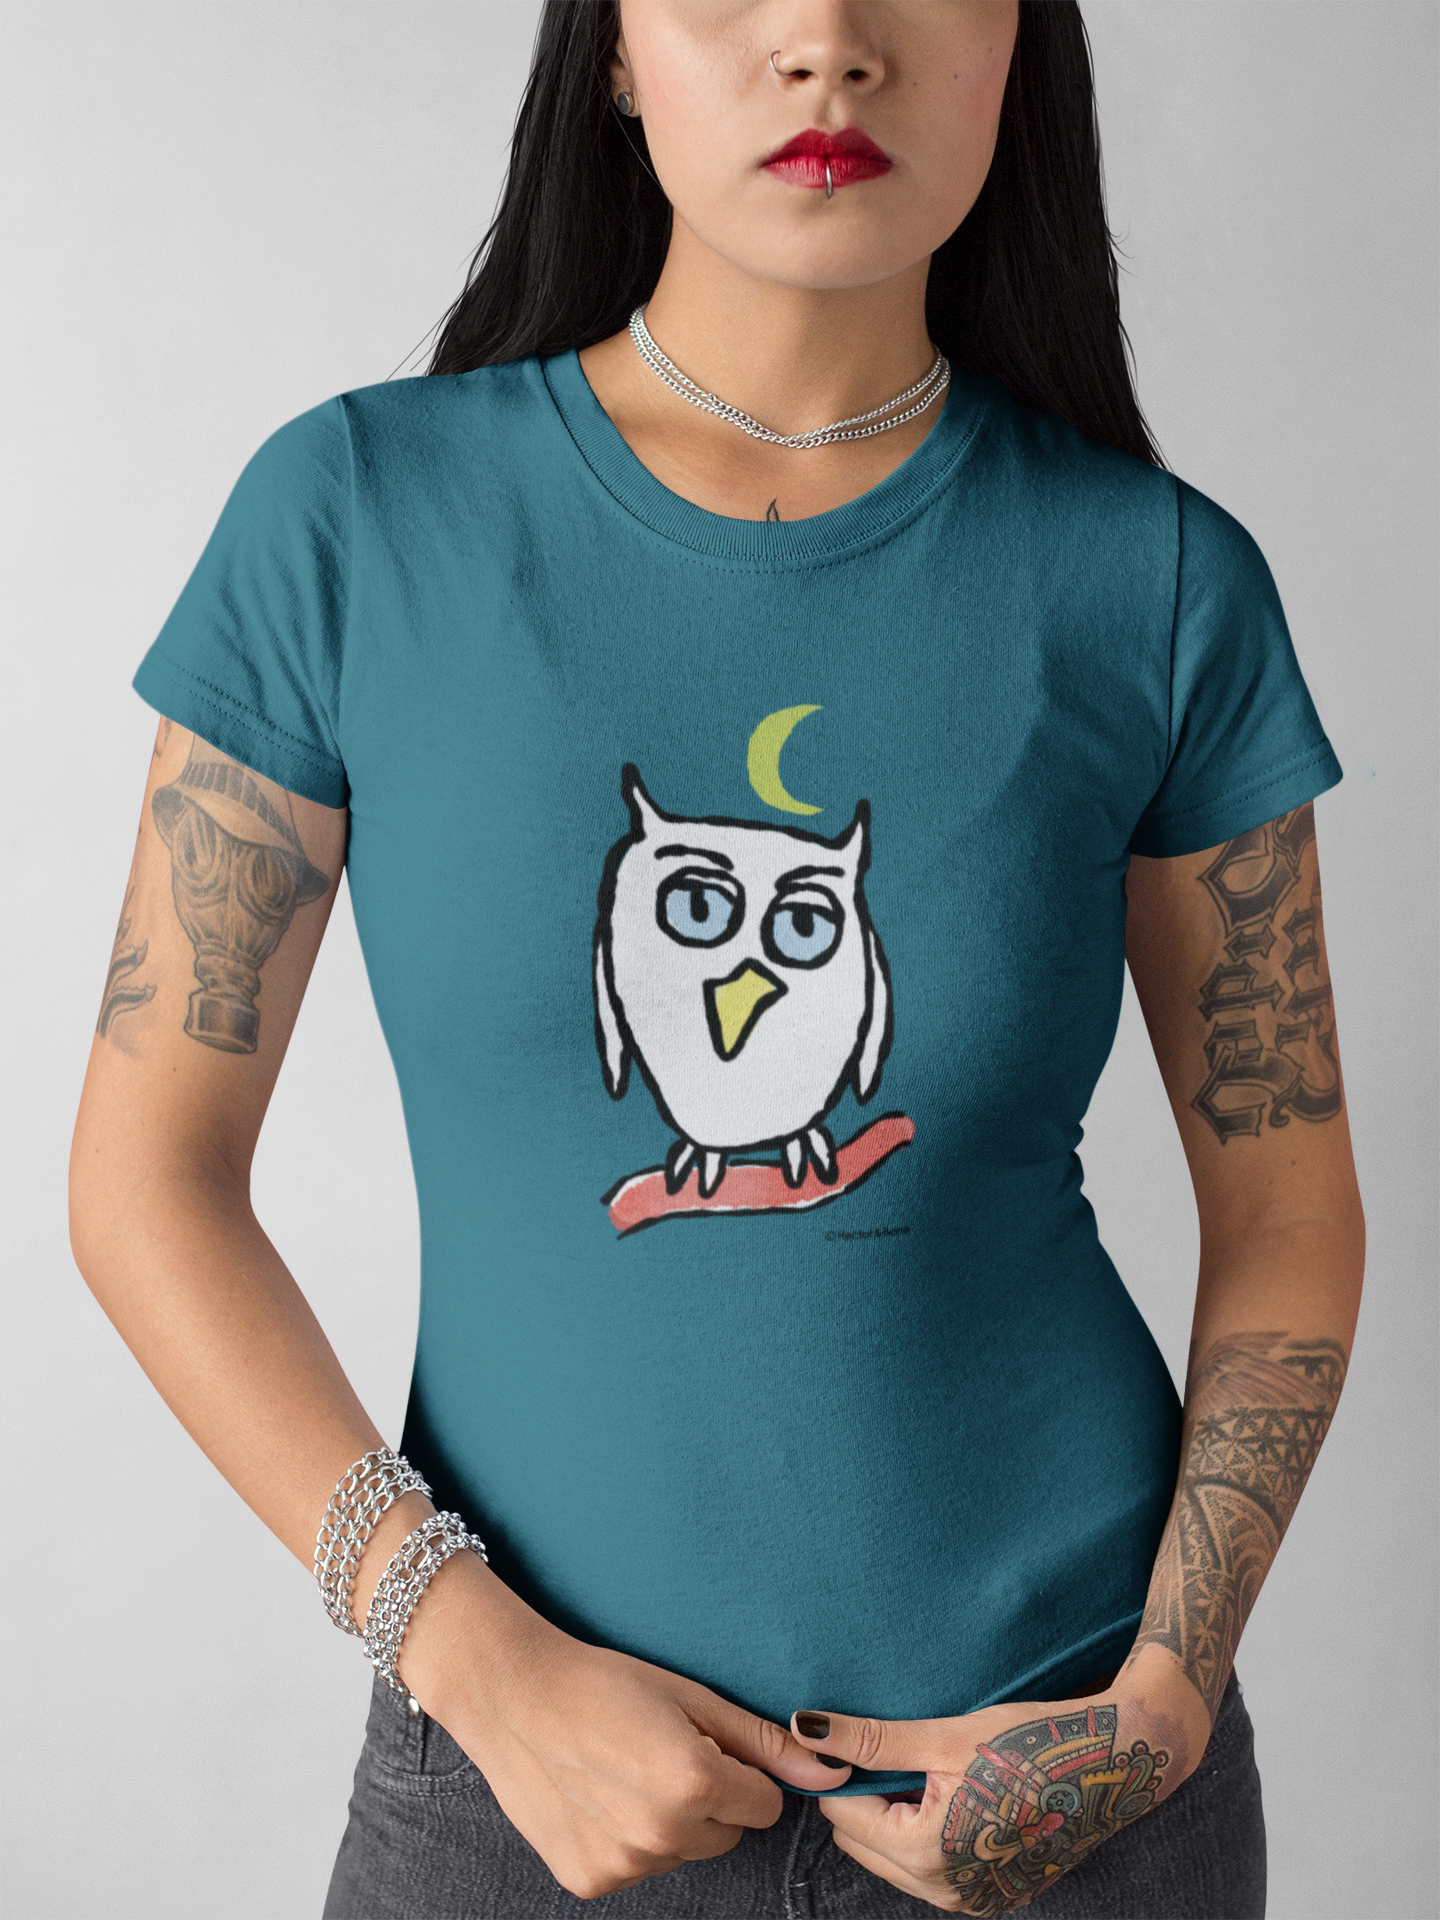 Owl T-shirts - Young woman wearing a stargazer blue colour vegan cotton Night Owl T-shirt design by Hector and Bone